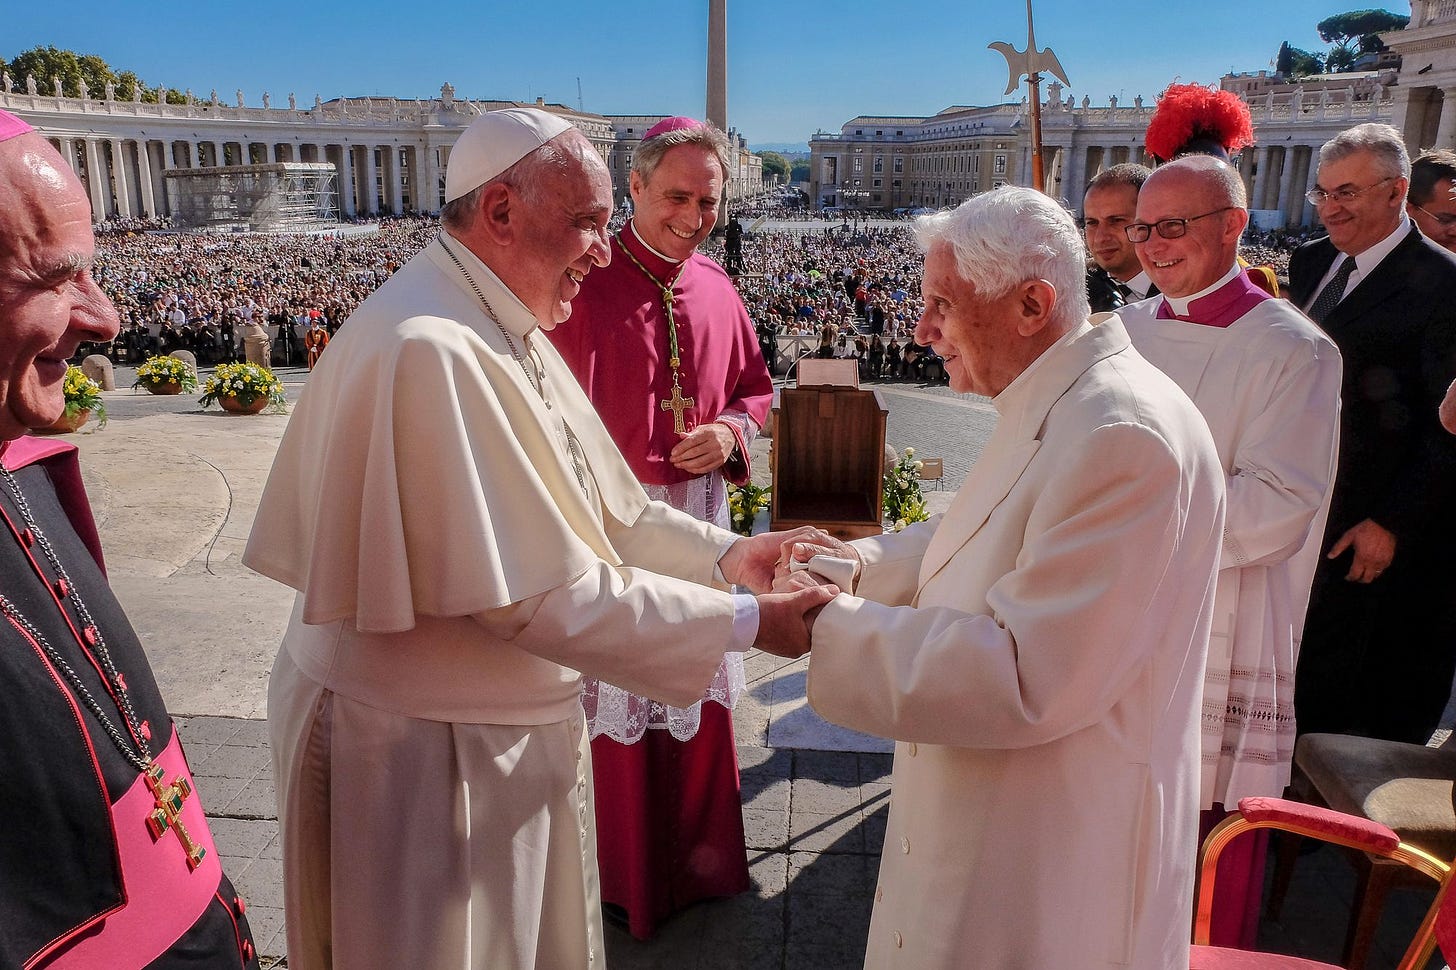 Pope Benedict’s most important legacy is Francis